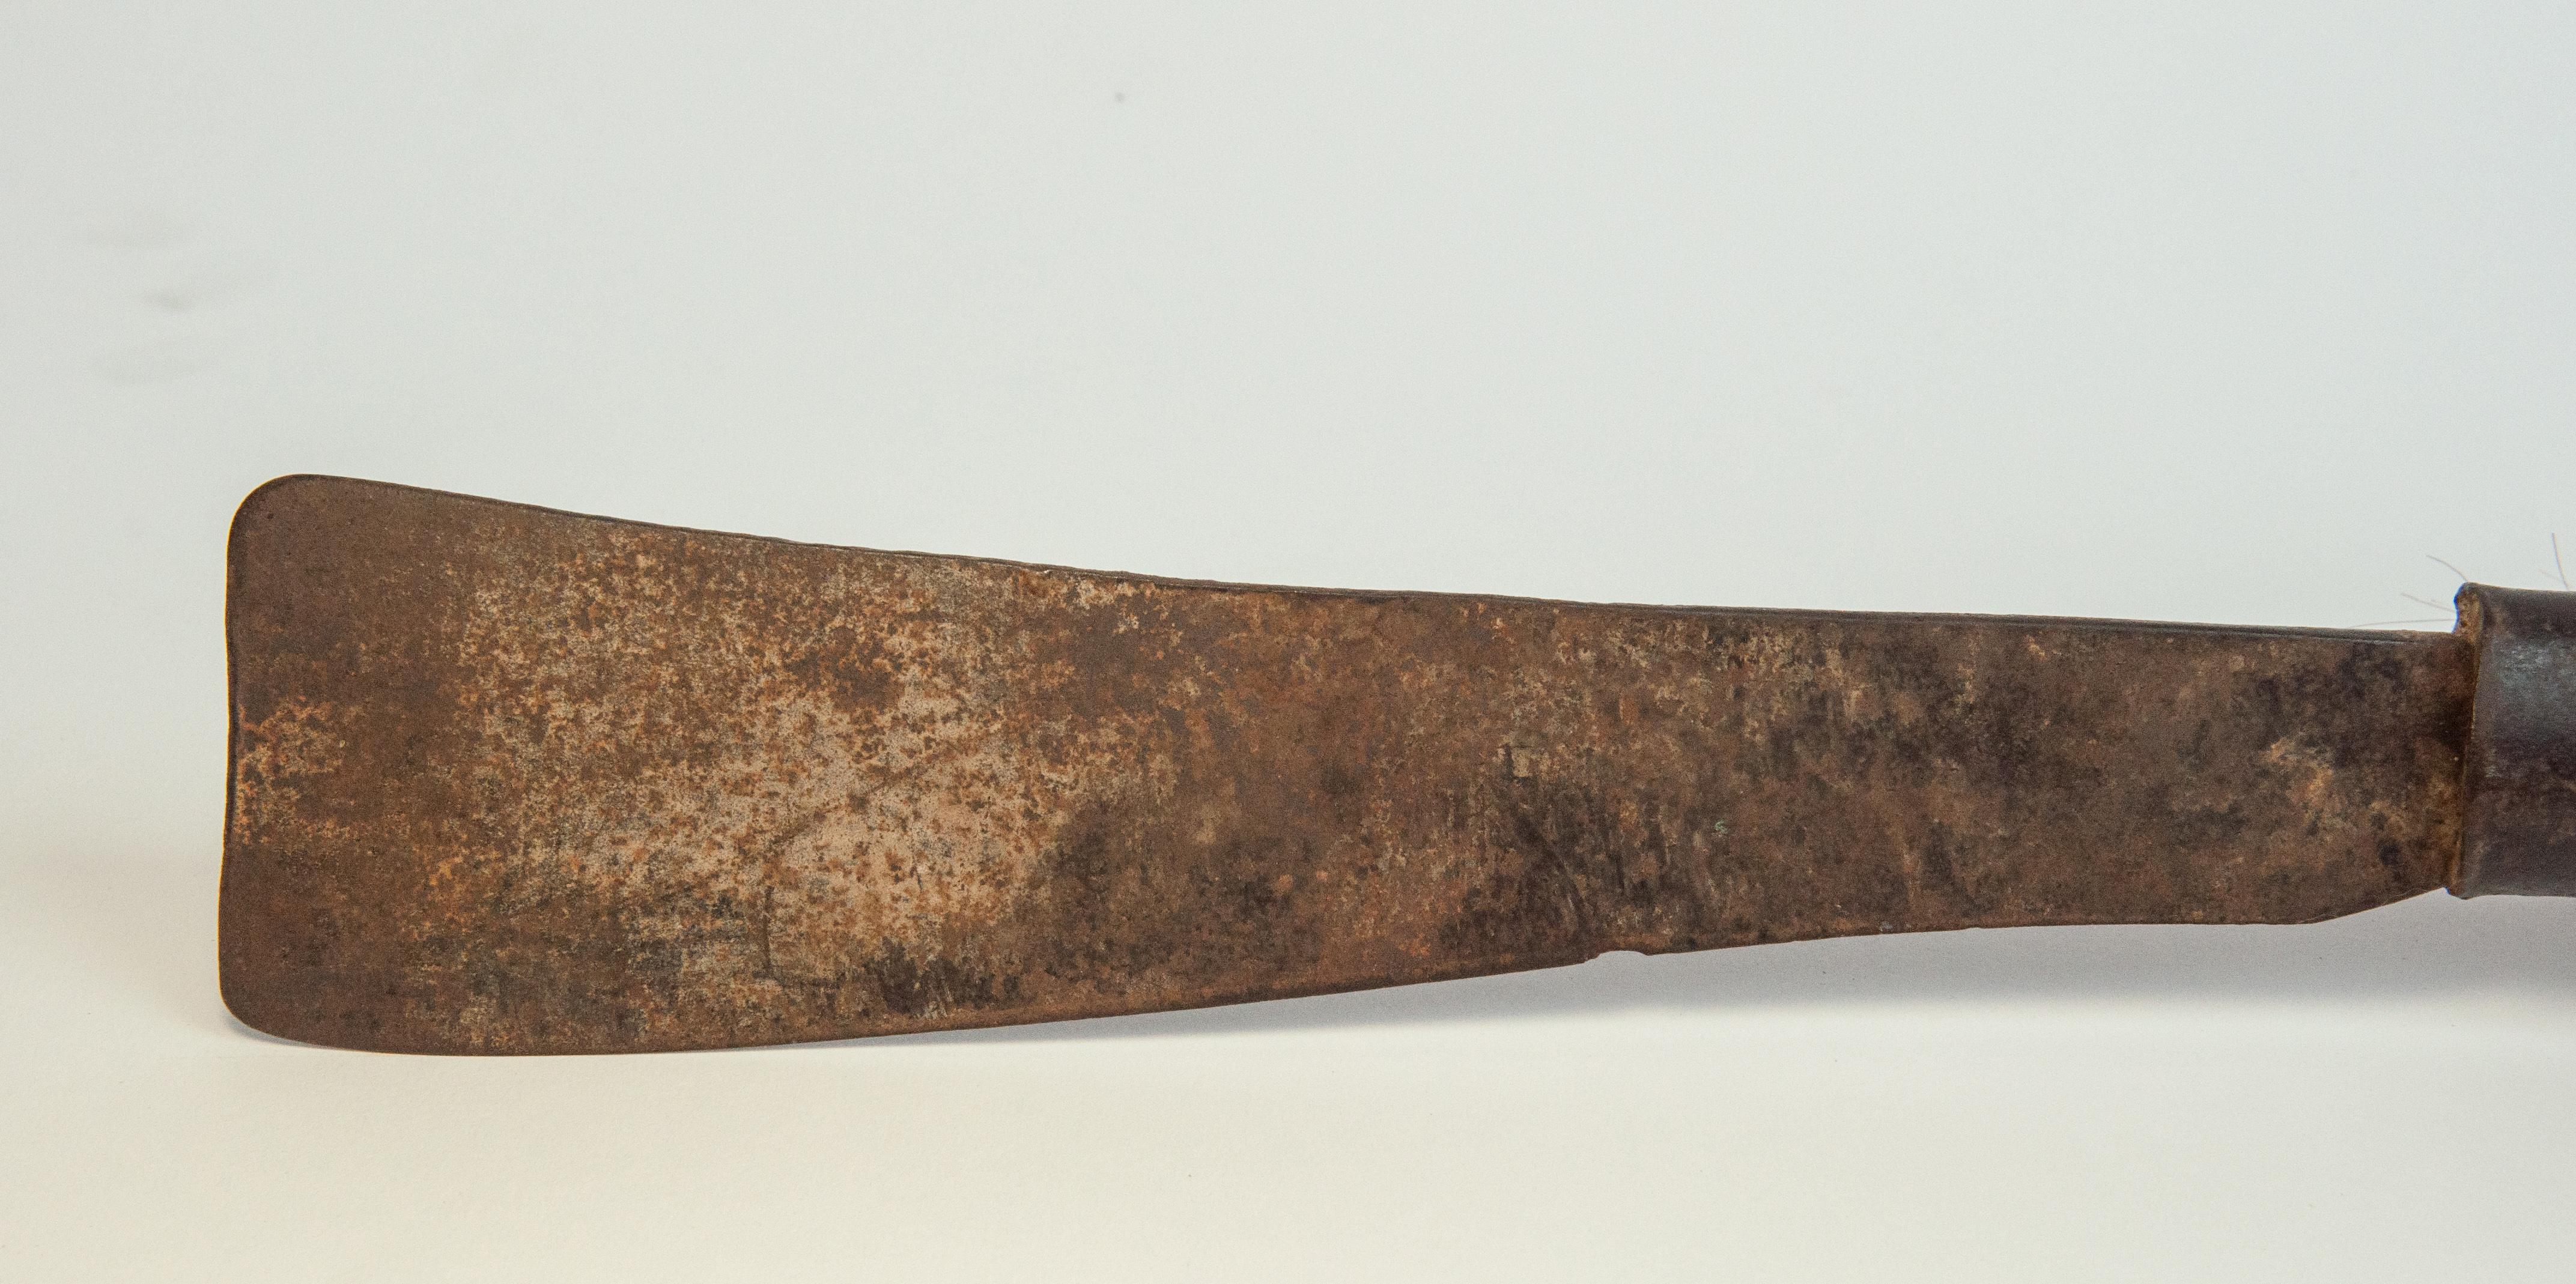 Dyed Tribal Ceremonial Knife with Goat Hair Decoration, Nagaland, Mid-20th Century